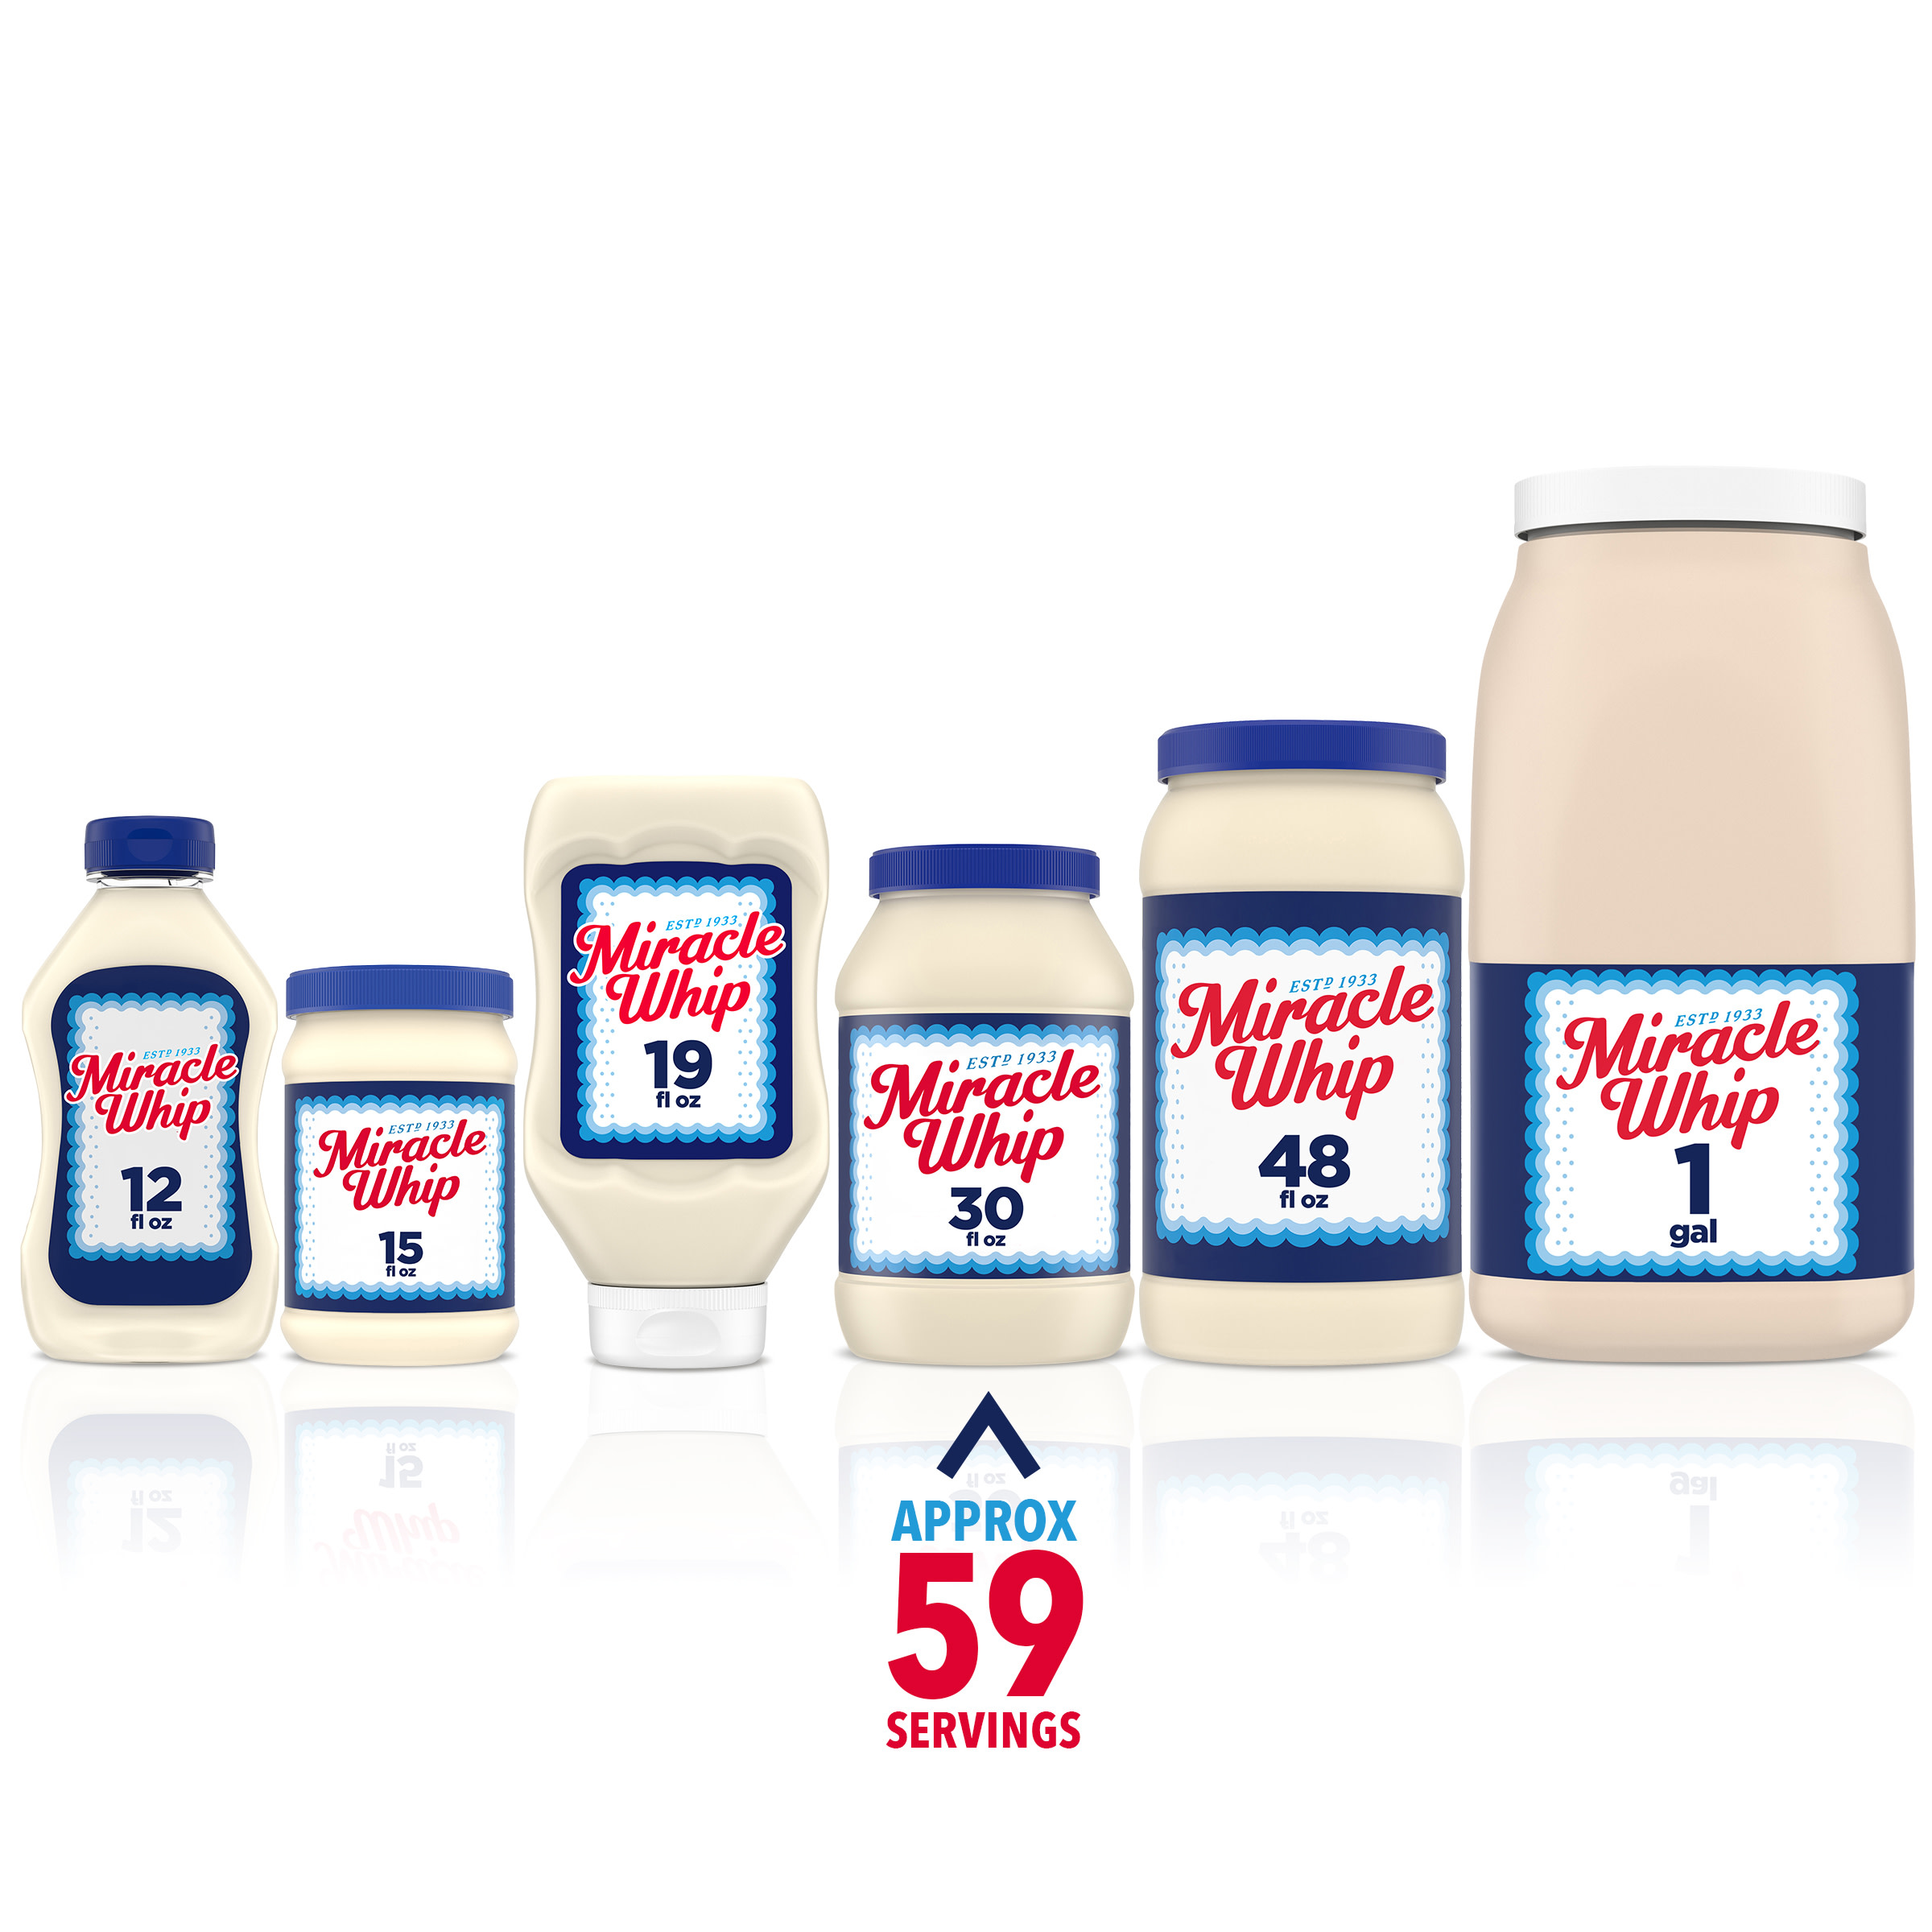 (3 pack) Miracle Whip Mayo-like Dressing, for a Keto and Low Carb Lifestyle, 30 fl oz Jar - image 5 of 19